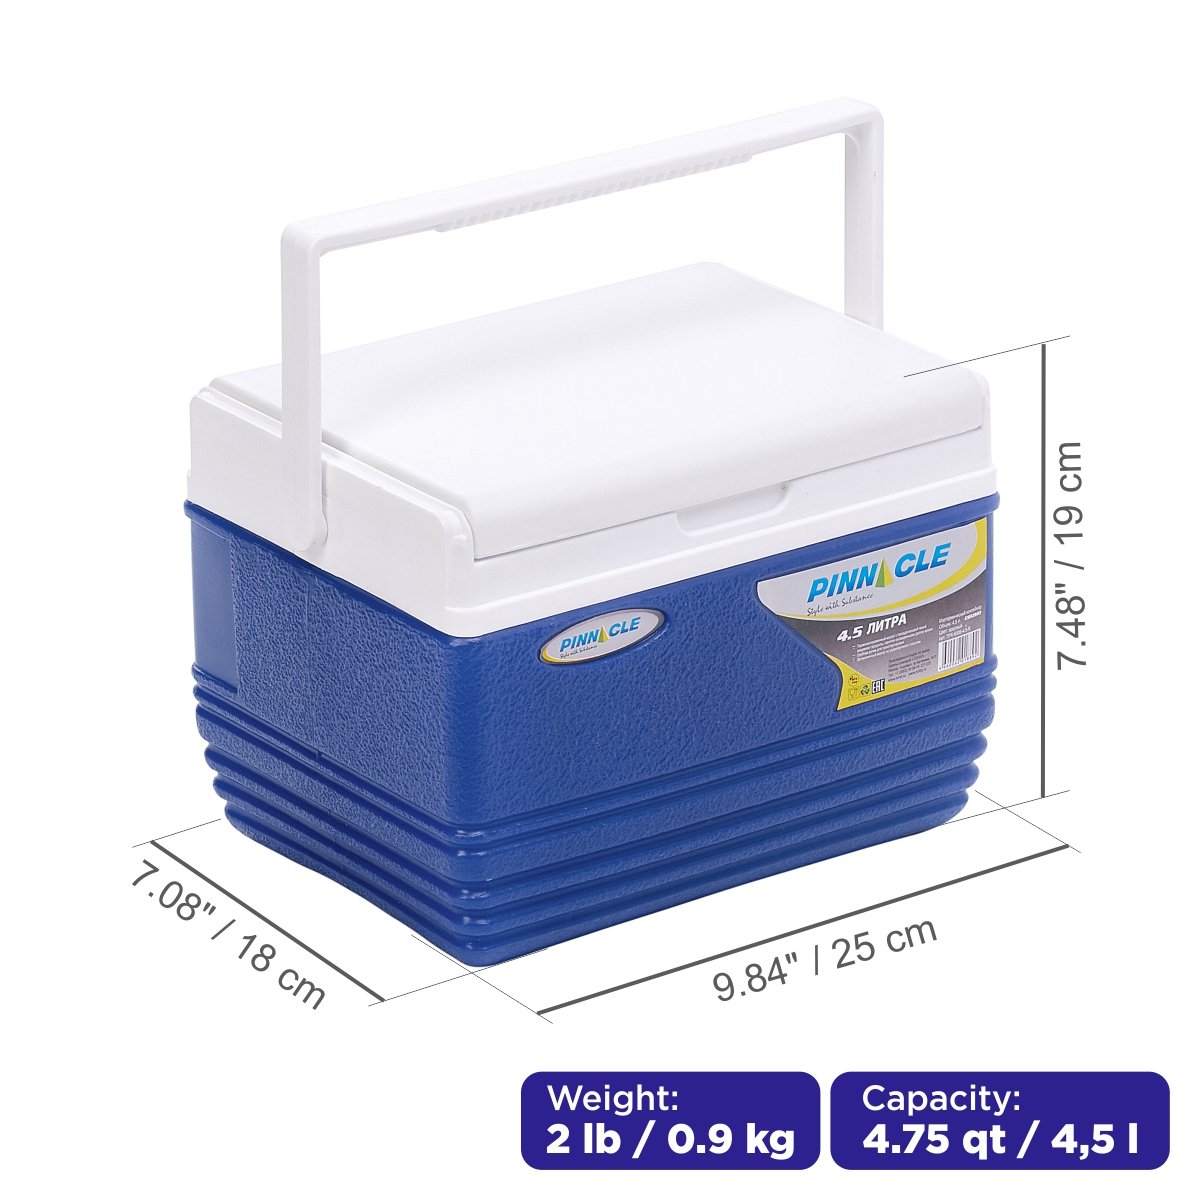 Eskimo Portable Hard-Sided Ice Chest for Camping, 4 qt, is 10 inches long, 7 inches wide and 7.5 inches high, weighing 2 lbs